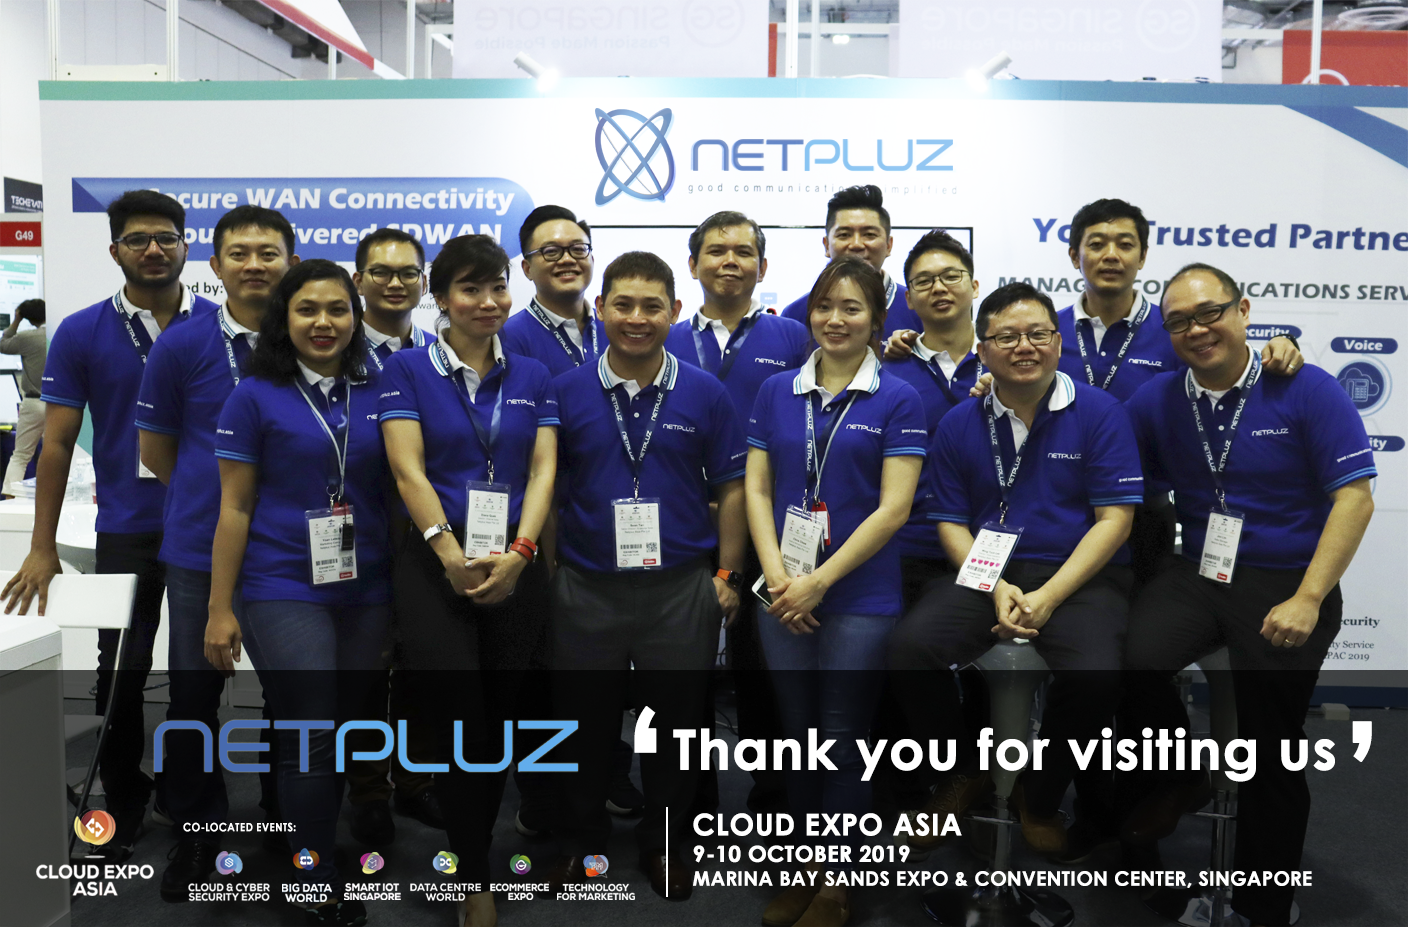 Thank you for visiting us at Cloud Expo Asia 2019